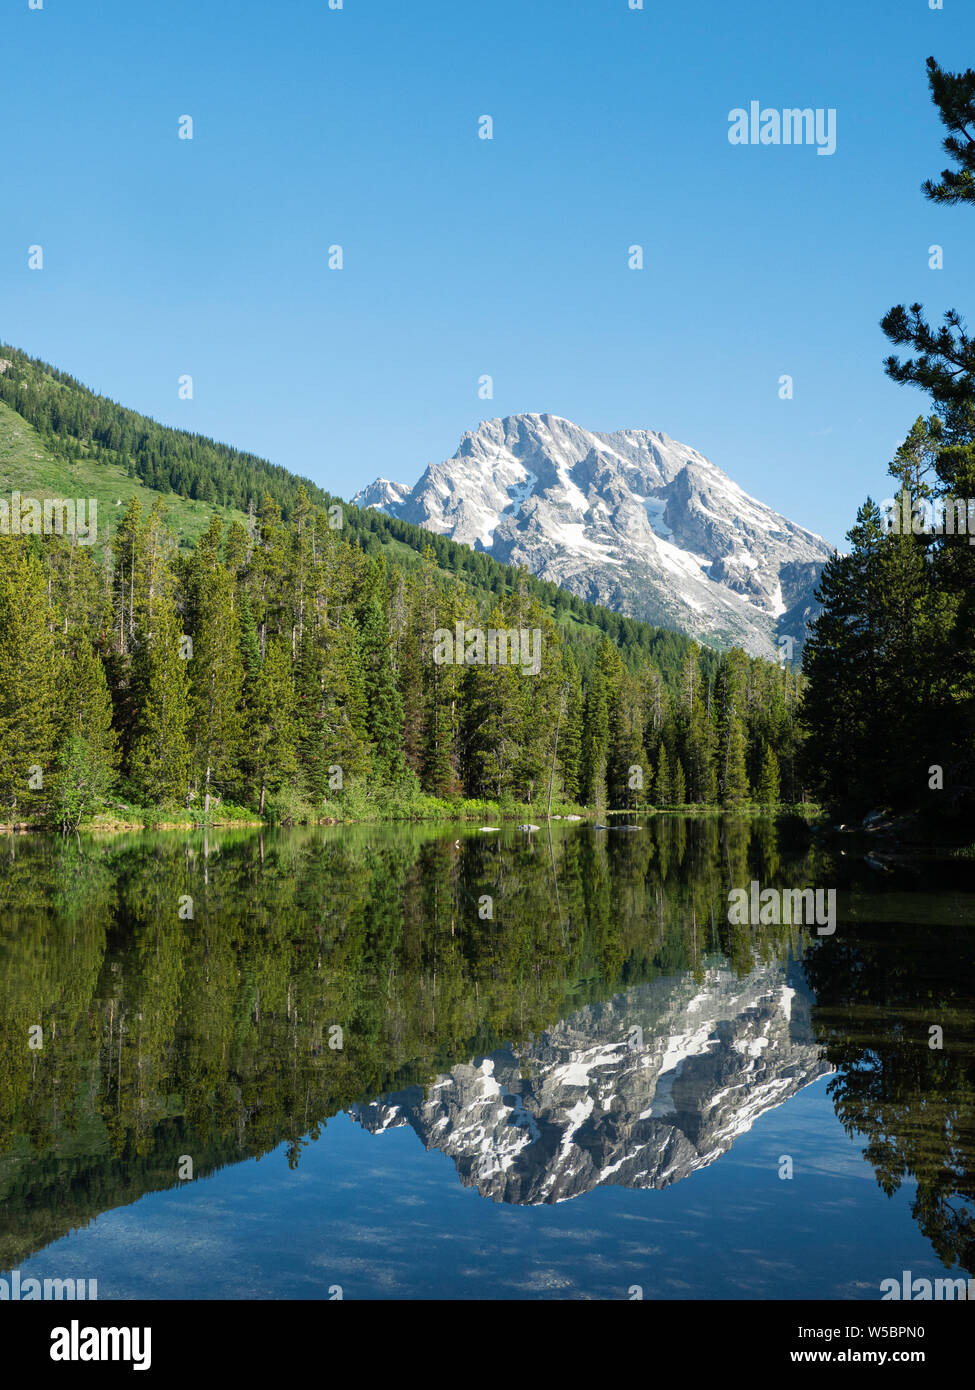 Snow-capped mountains reflected in the calm waters of String Lake, Grand Teton National Park, Wyoming, USA. Stock Photo